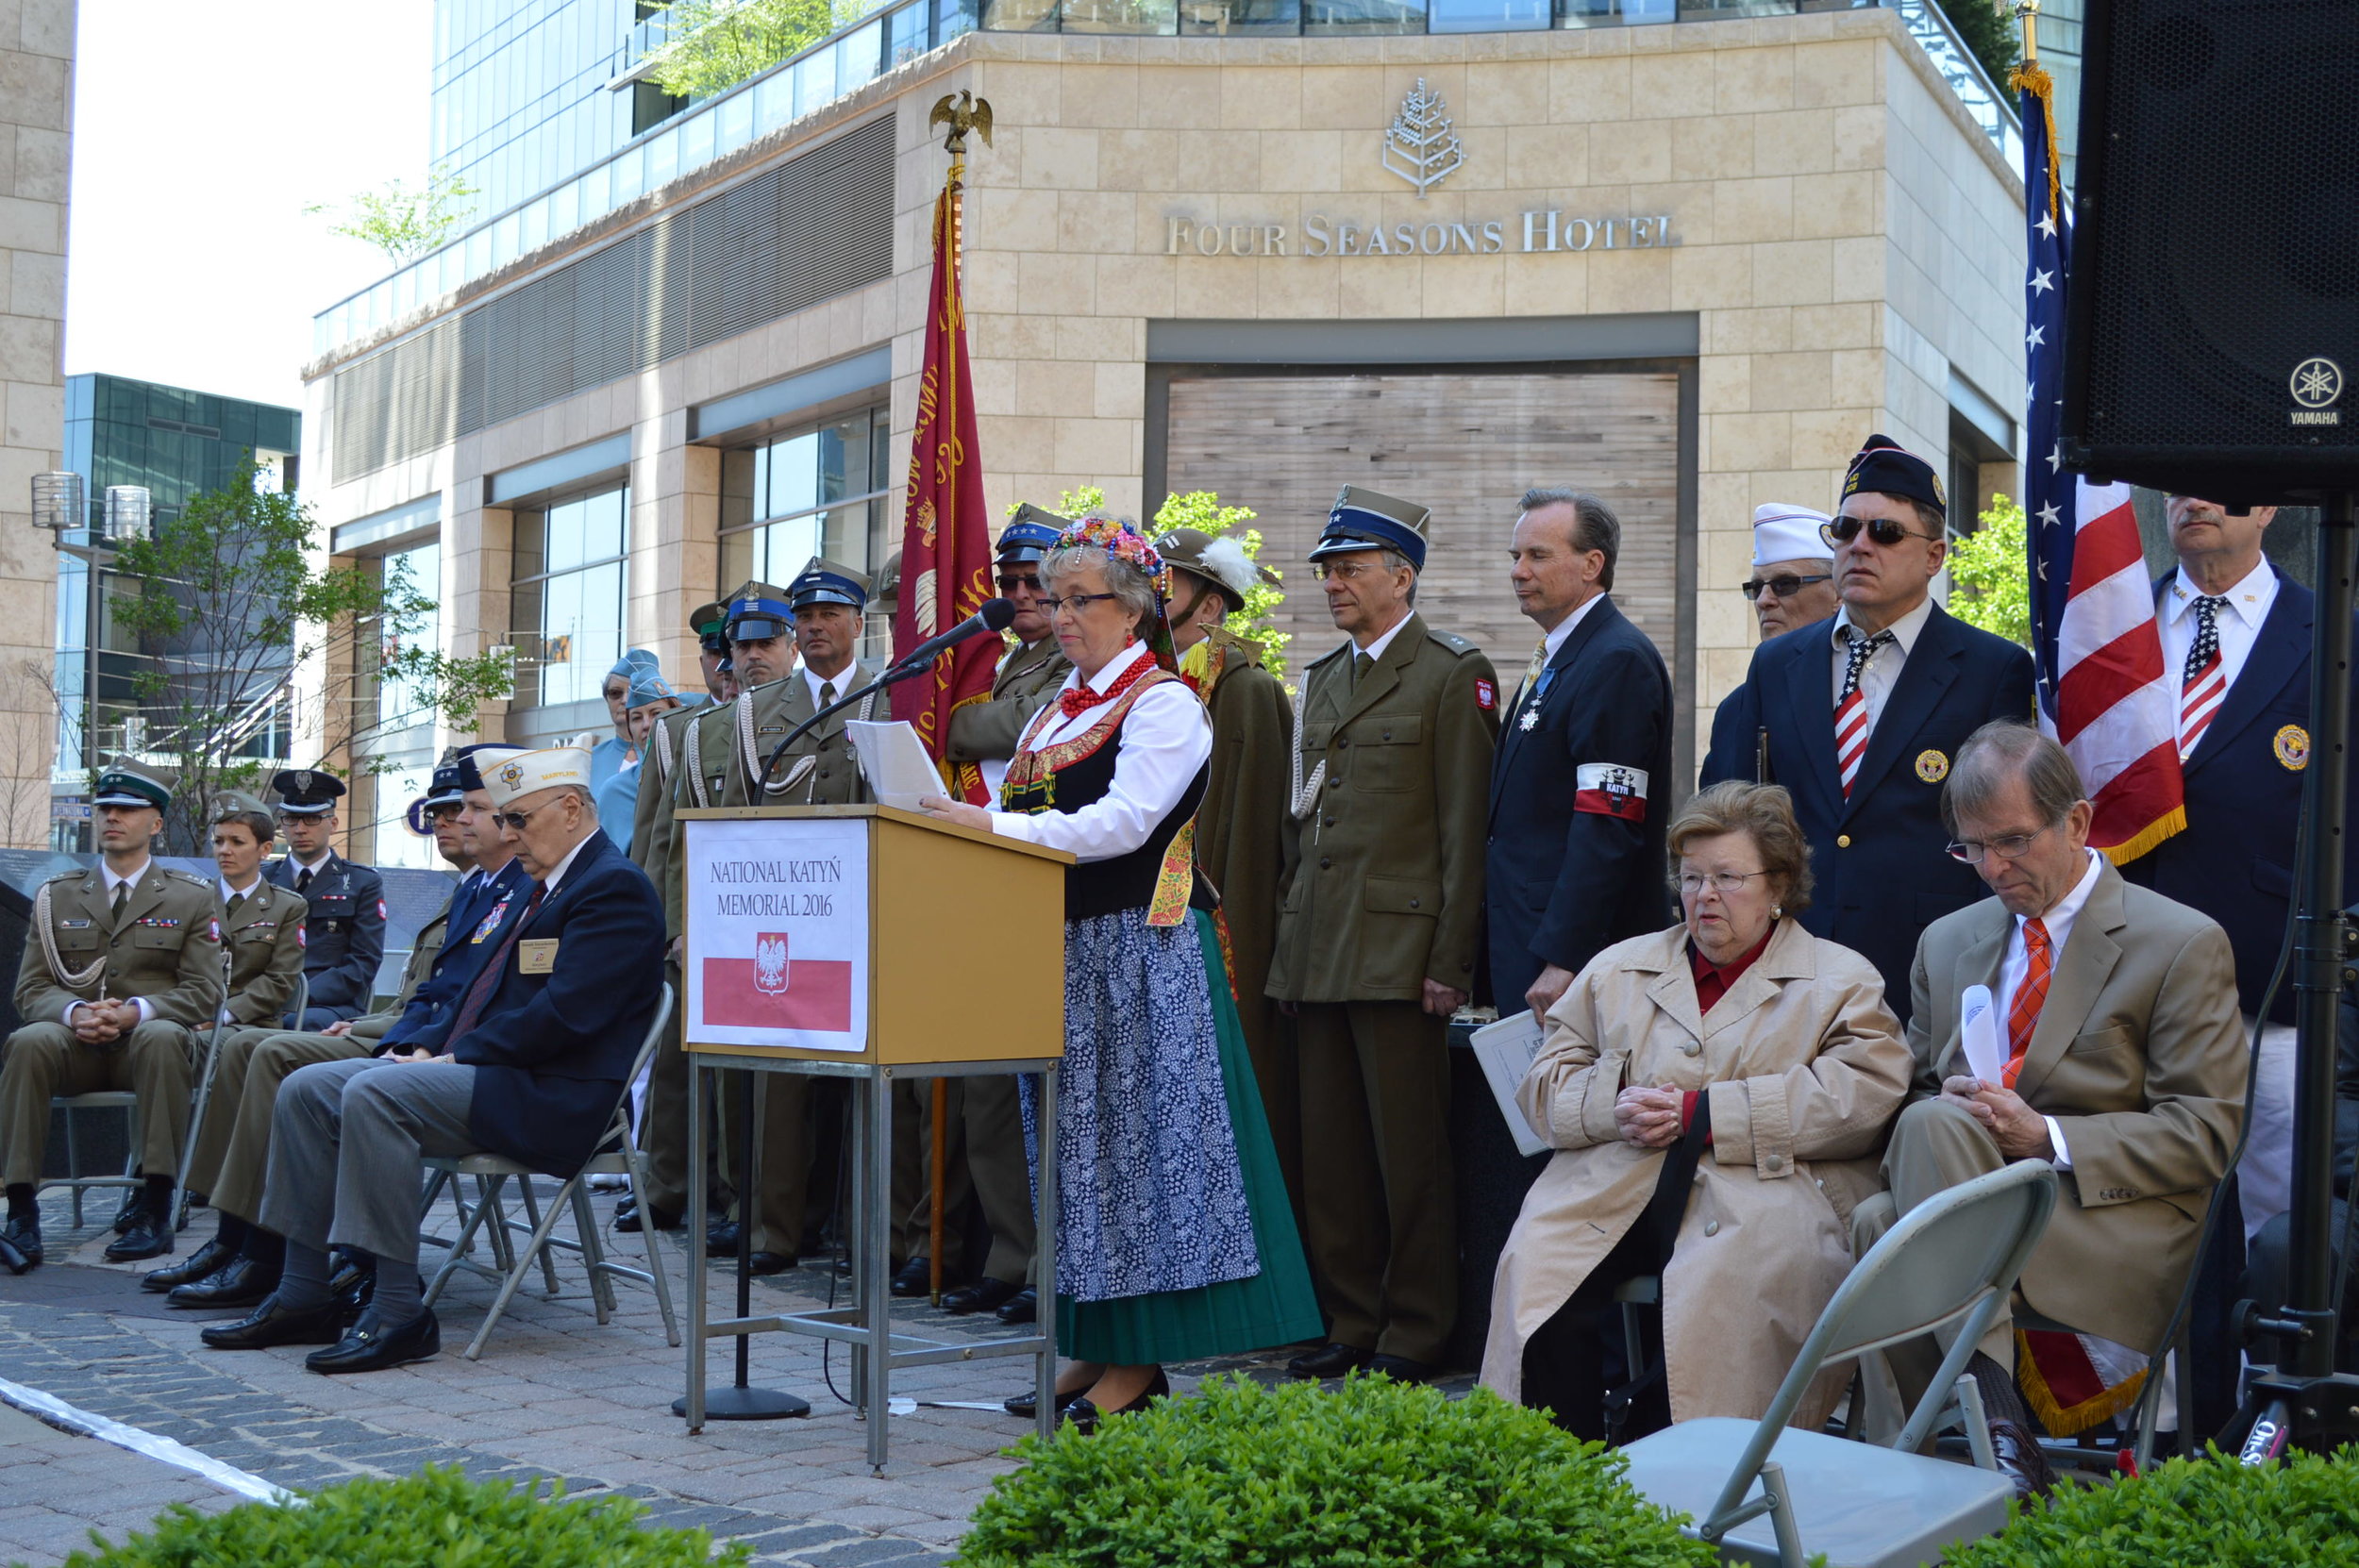 16th Annual Remembrance Day